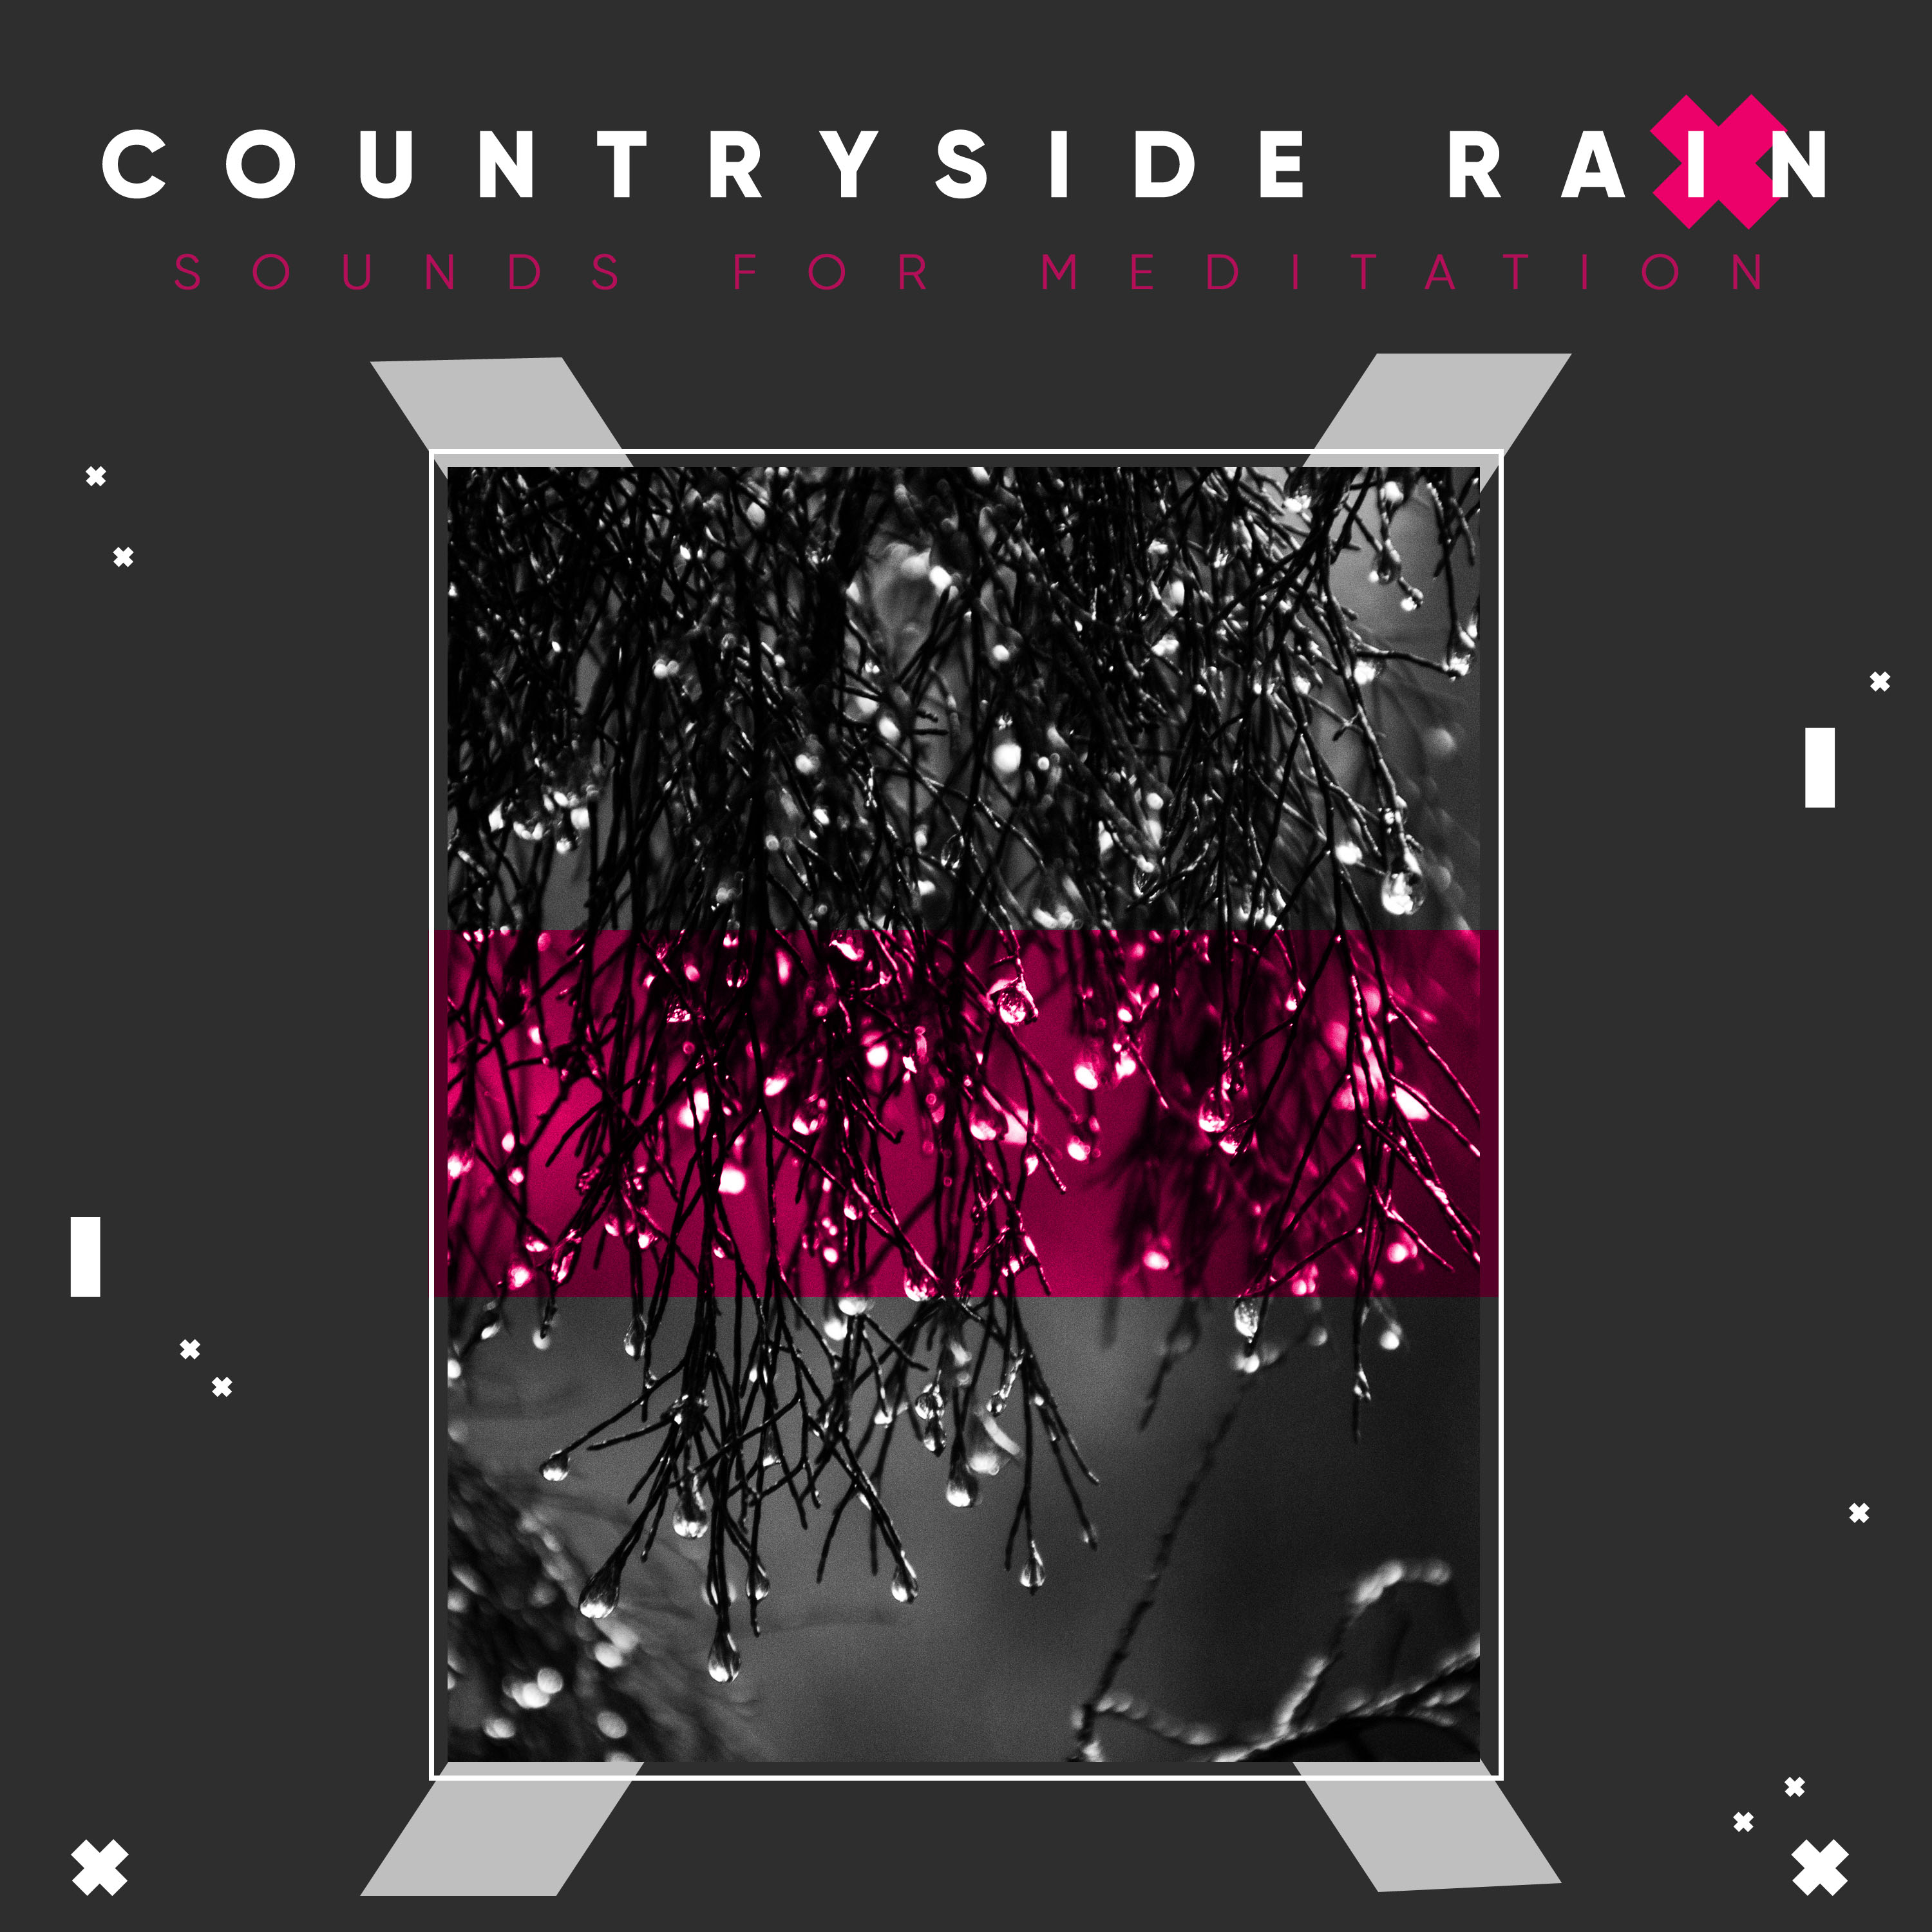 #20 Countryside Rain Sounds for Guided Meditation